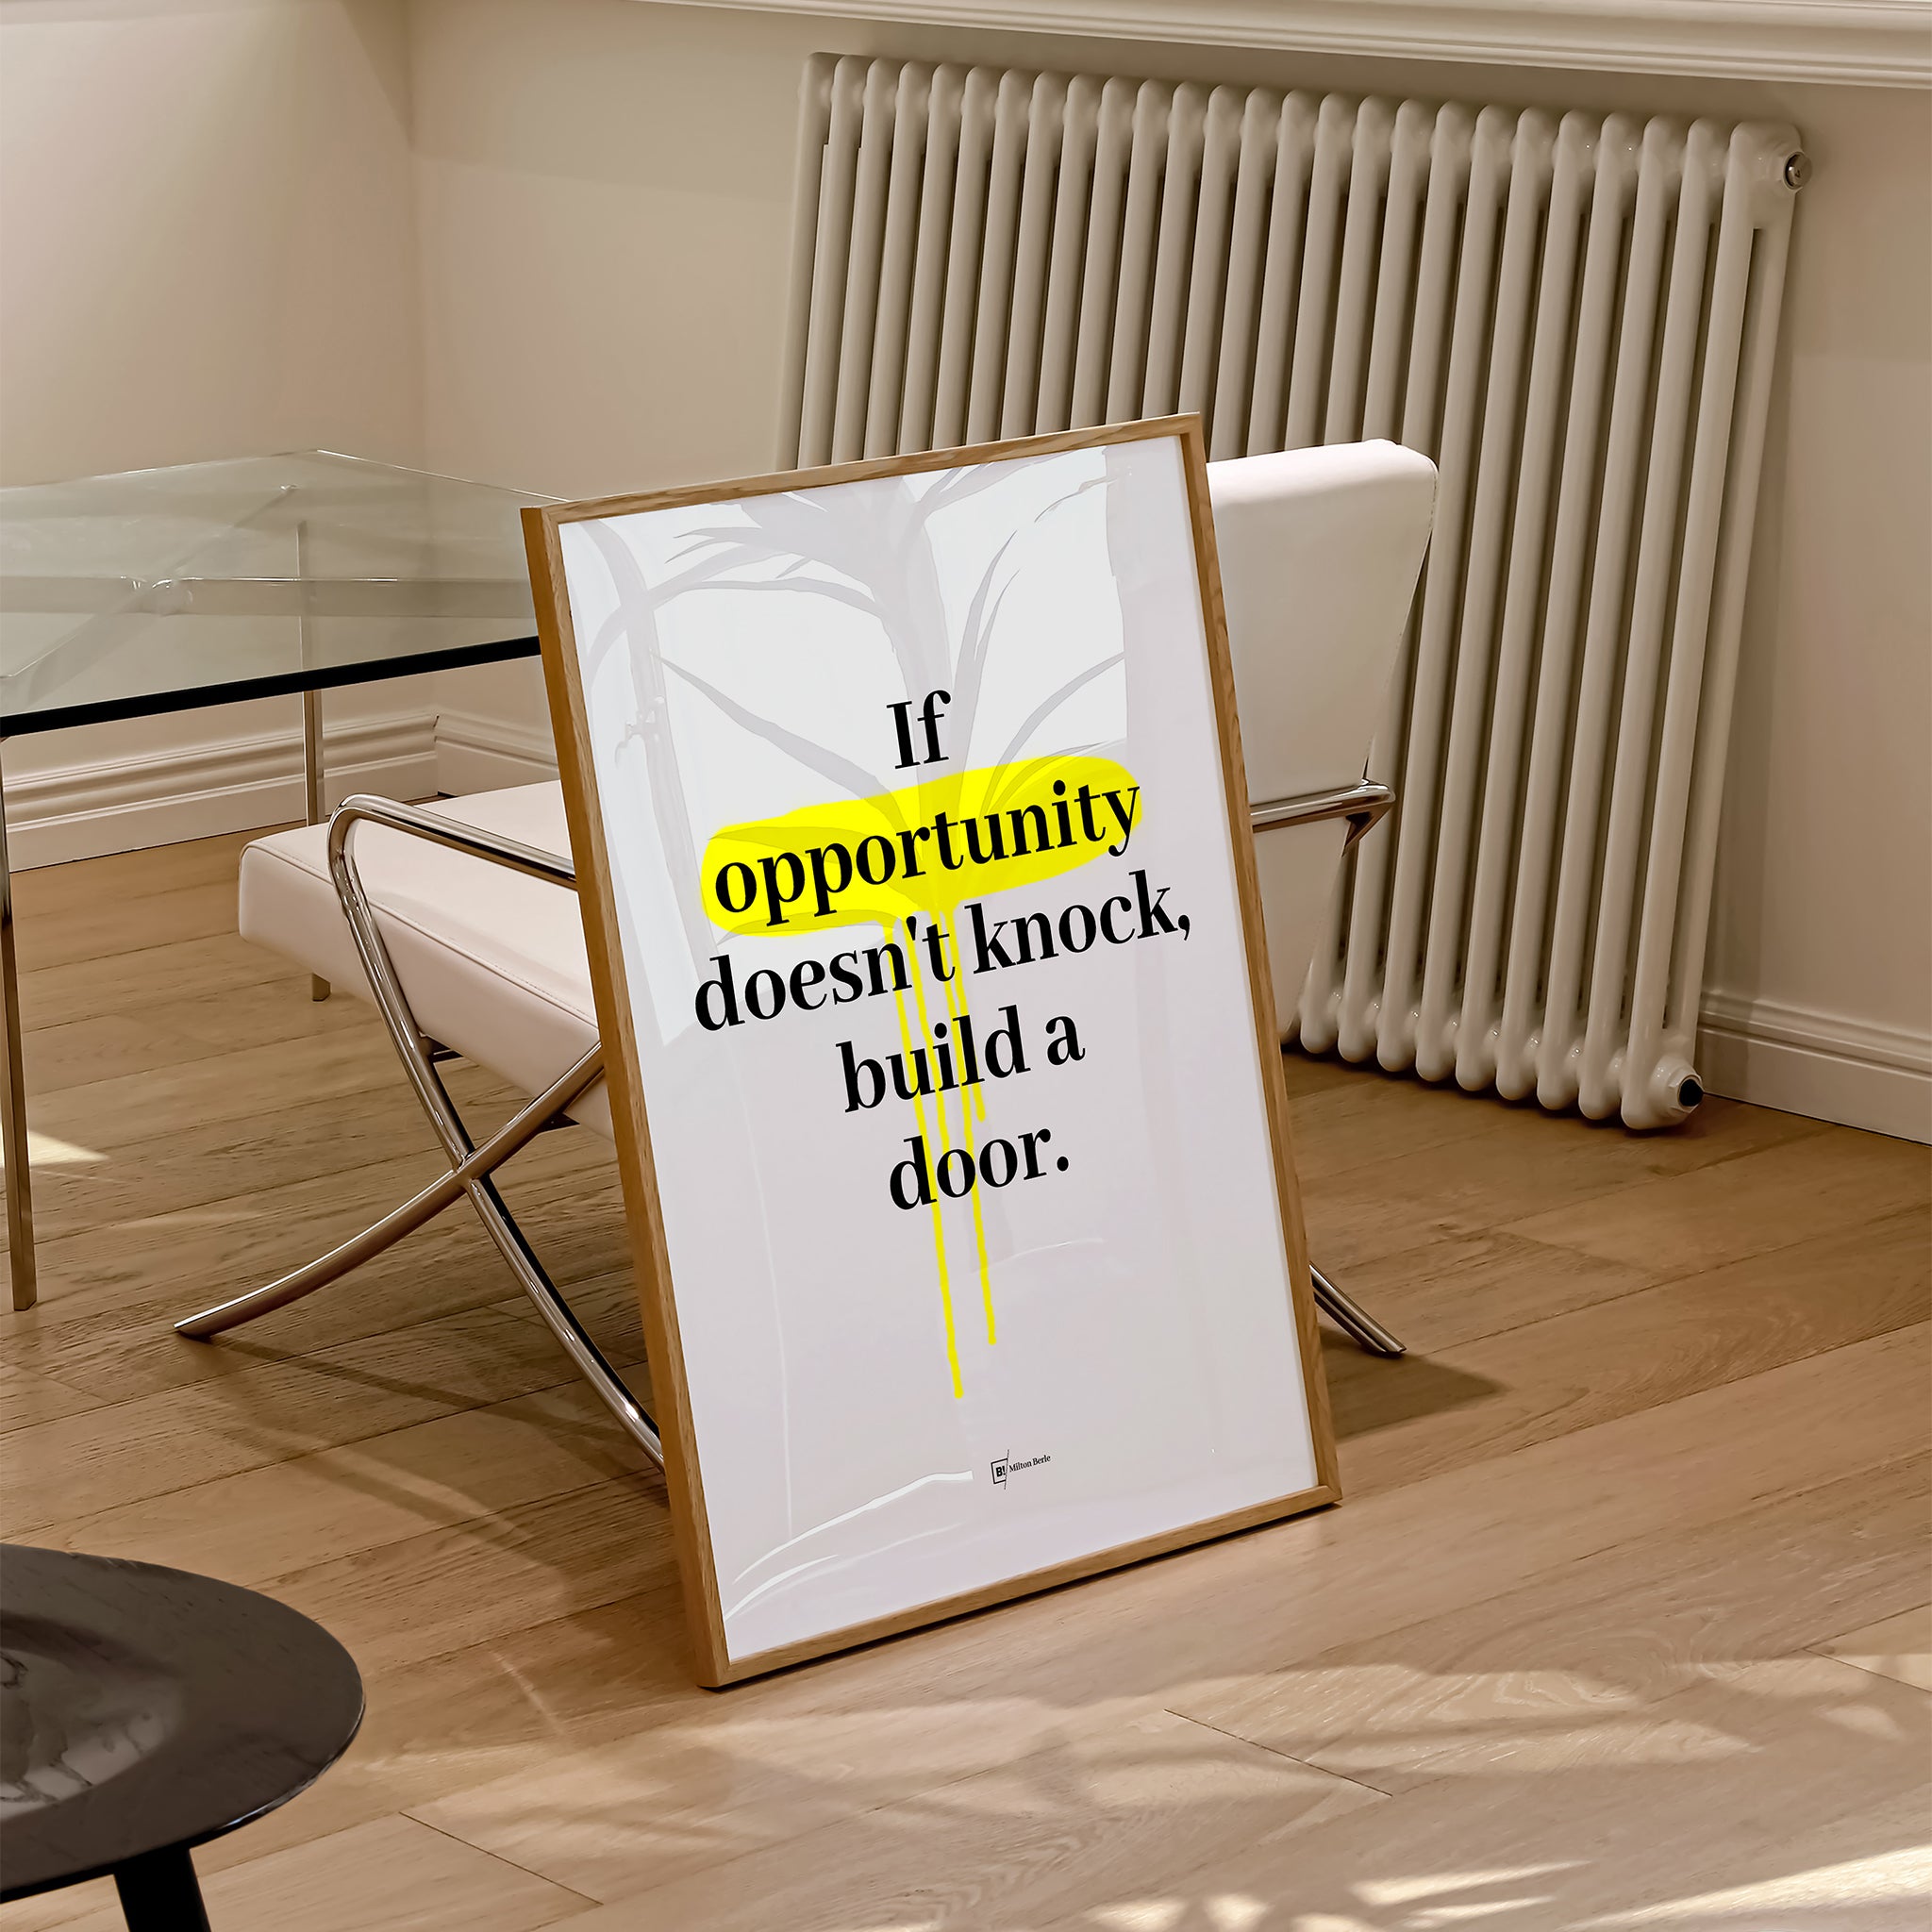 Be inspired by Milton Berle's famous "If opportunity doesn't knock, build a door" quote art print. This artwork was printed using the giclée process on archival acid-free paper and is presented in a natural oak frame that captures its timeless beauty in every detail.